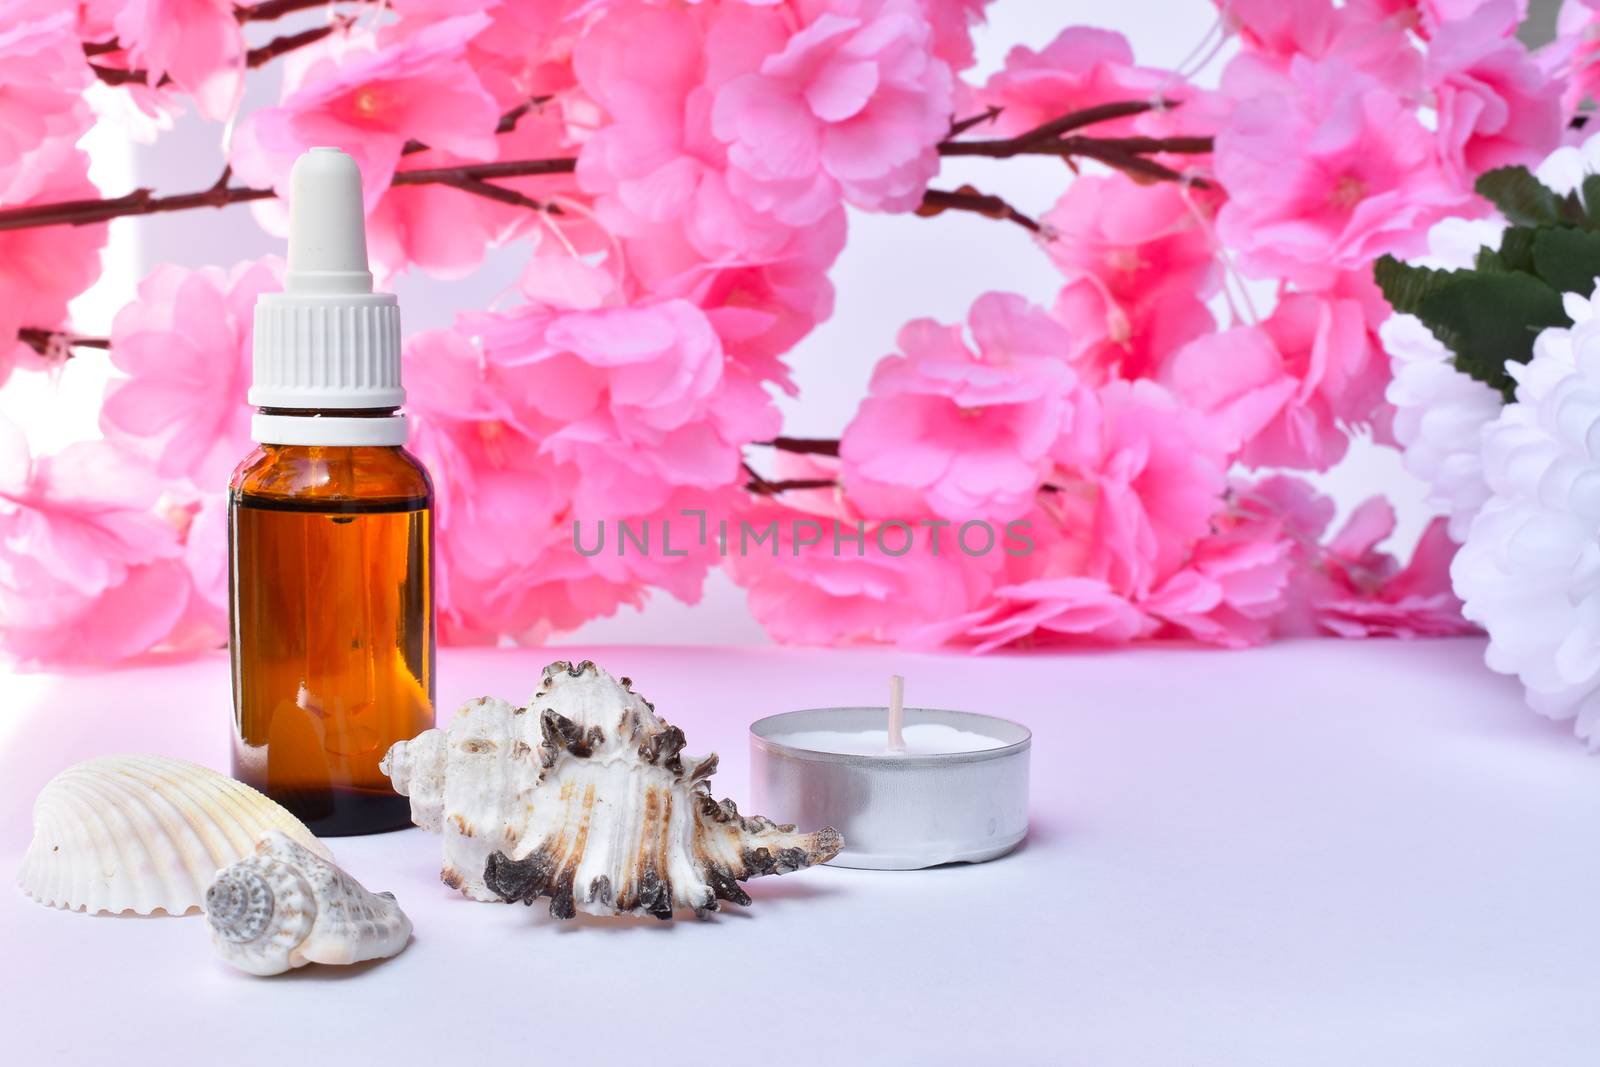 Floral argan oil background. The bottle behind pink sakura flowers, in front of it sea snail shells and small tealight scented candles in metal frame.